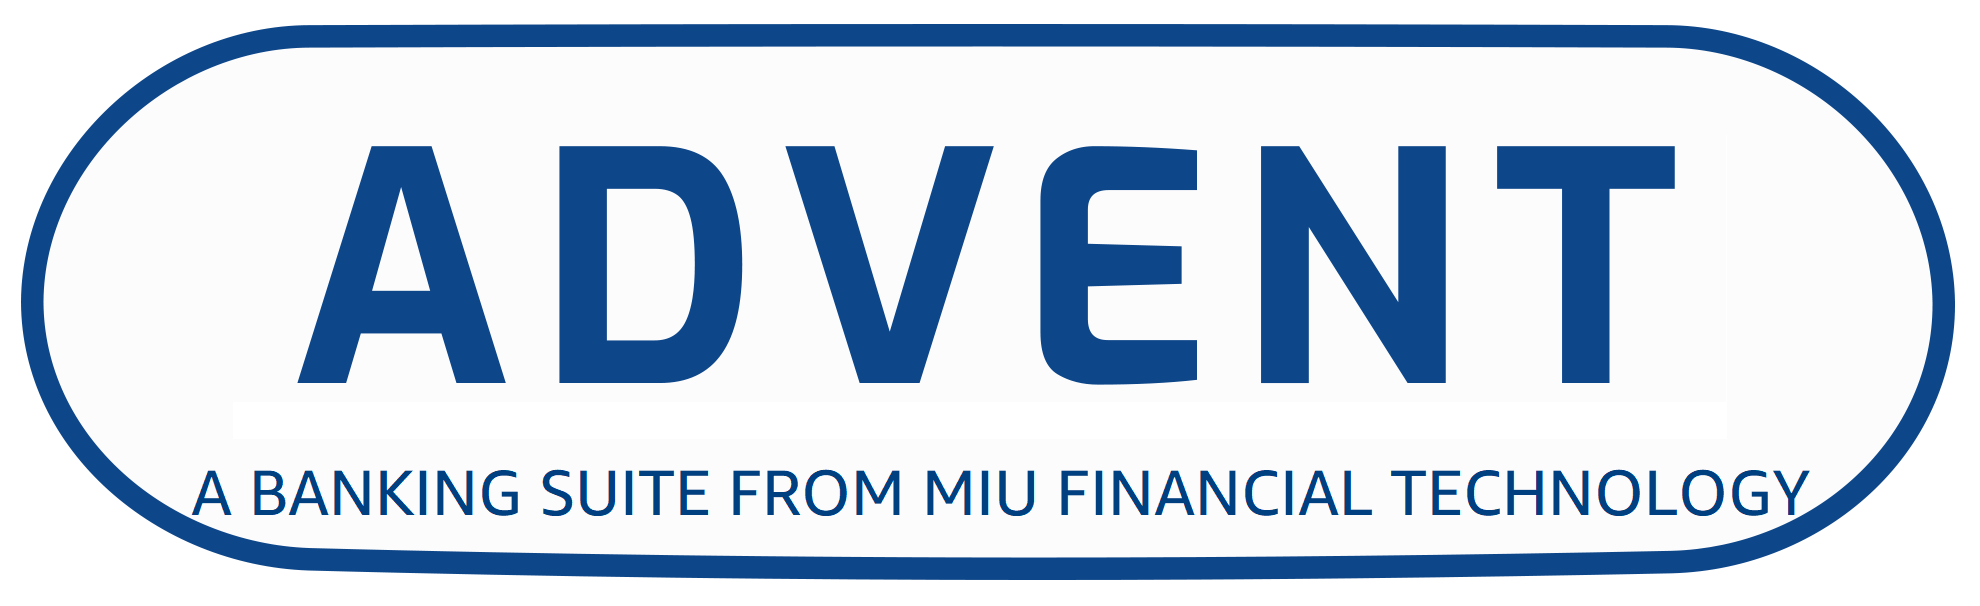 A BANKING SUITE FROM MIUFT